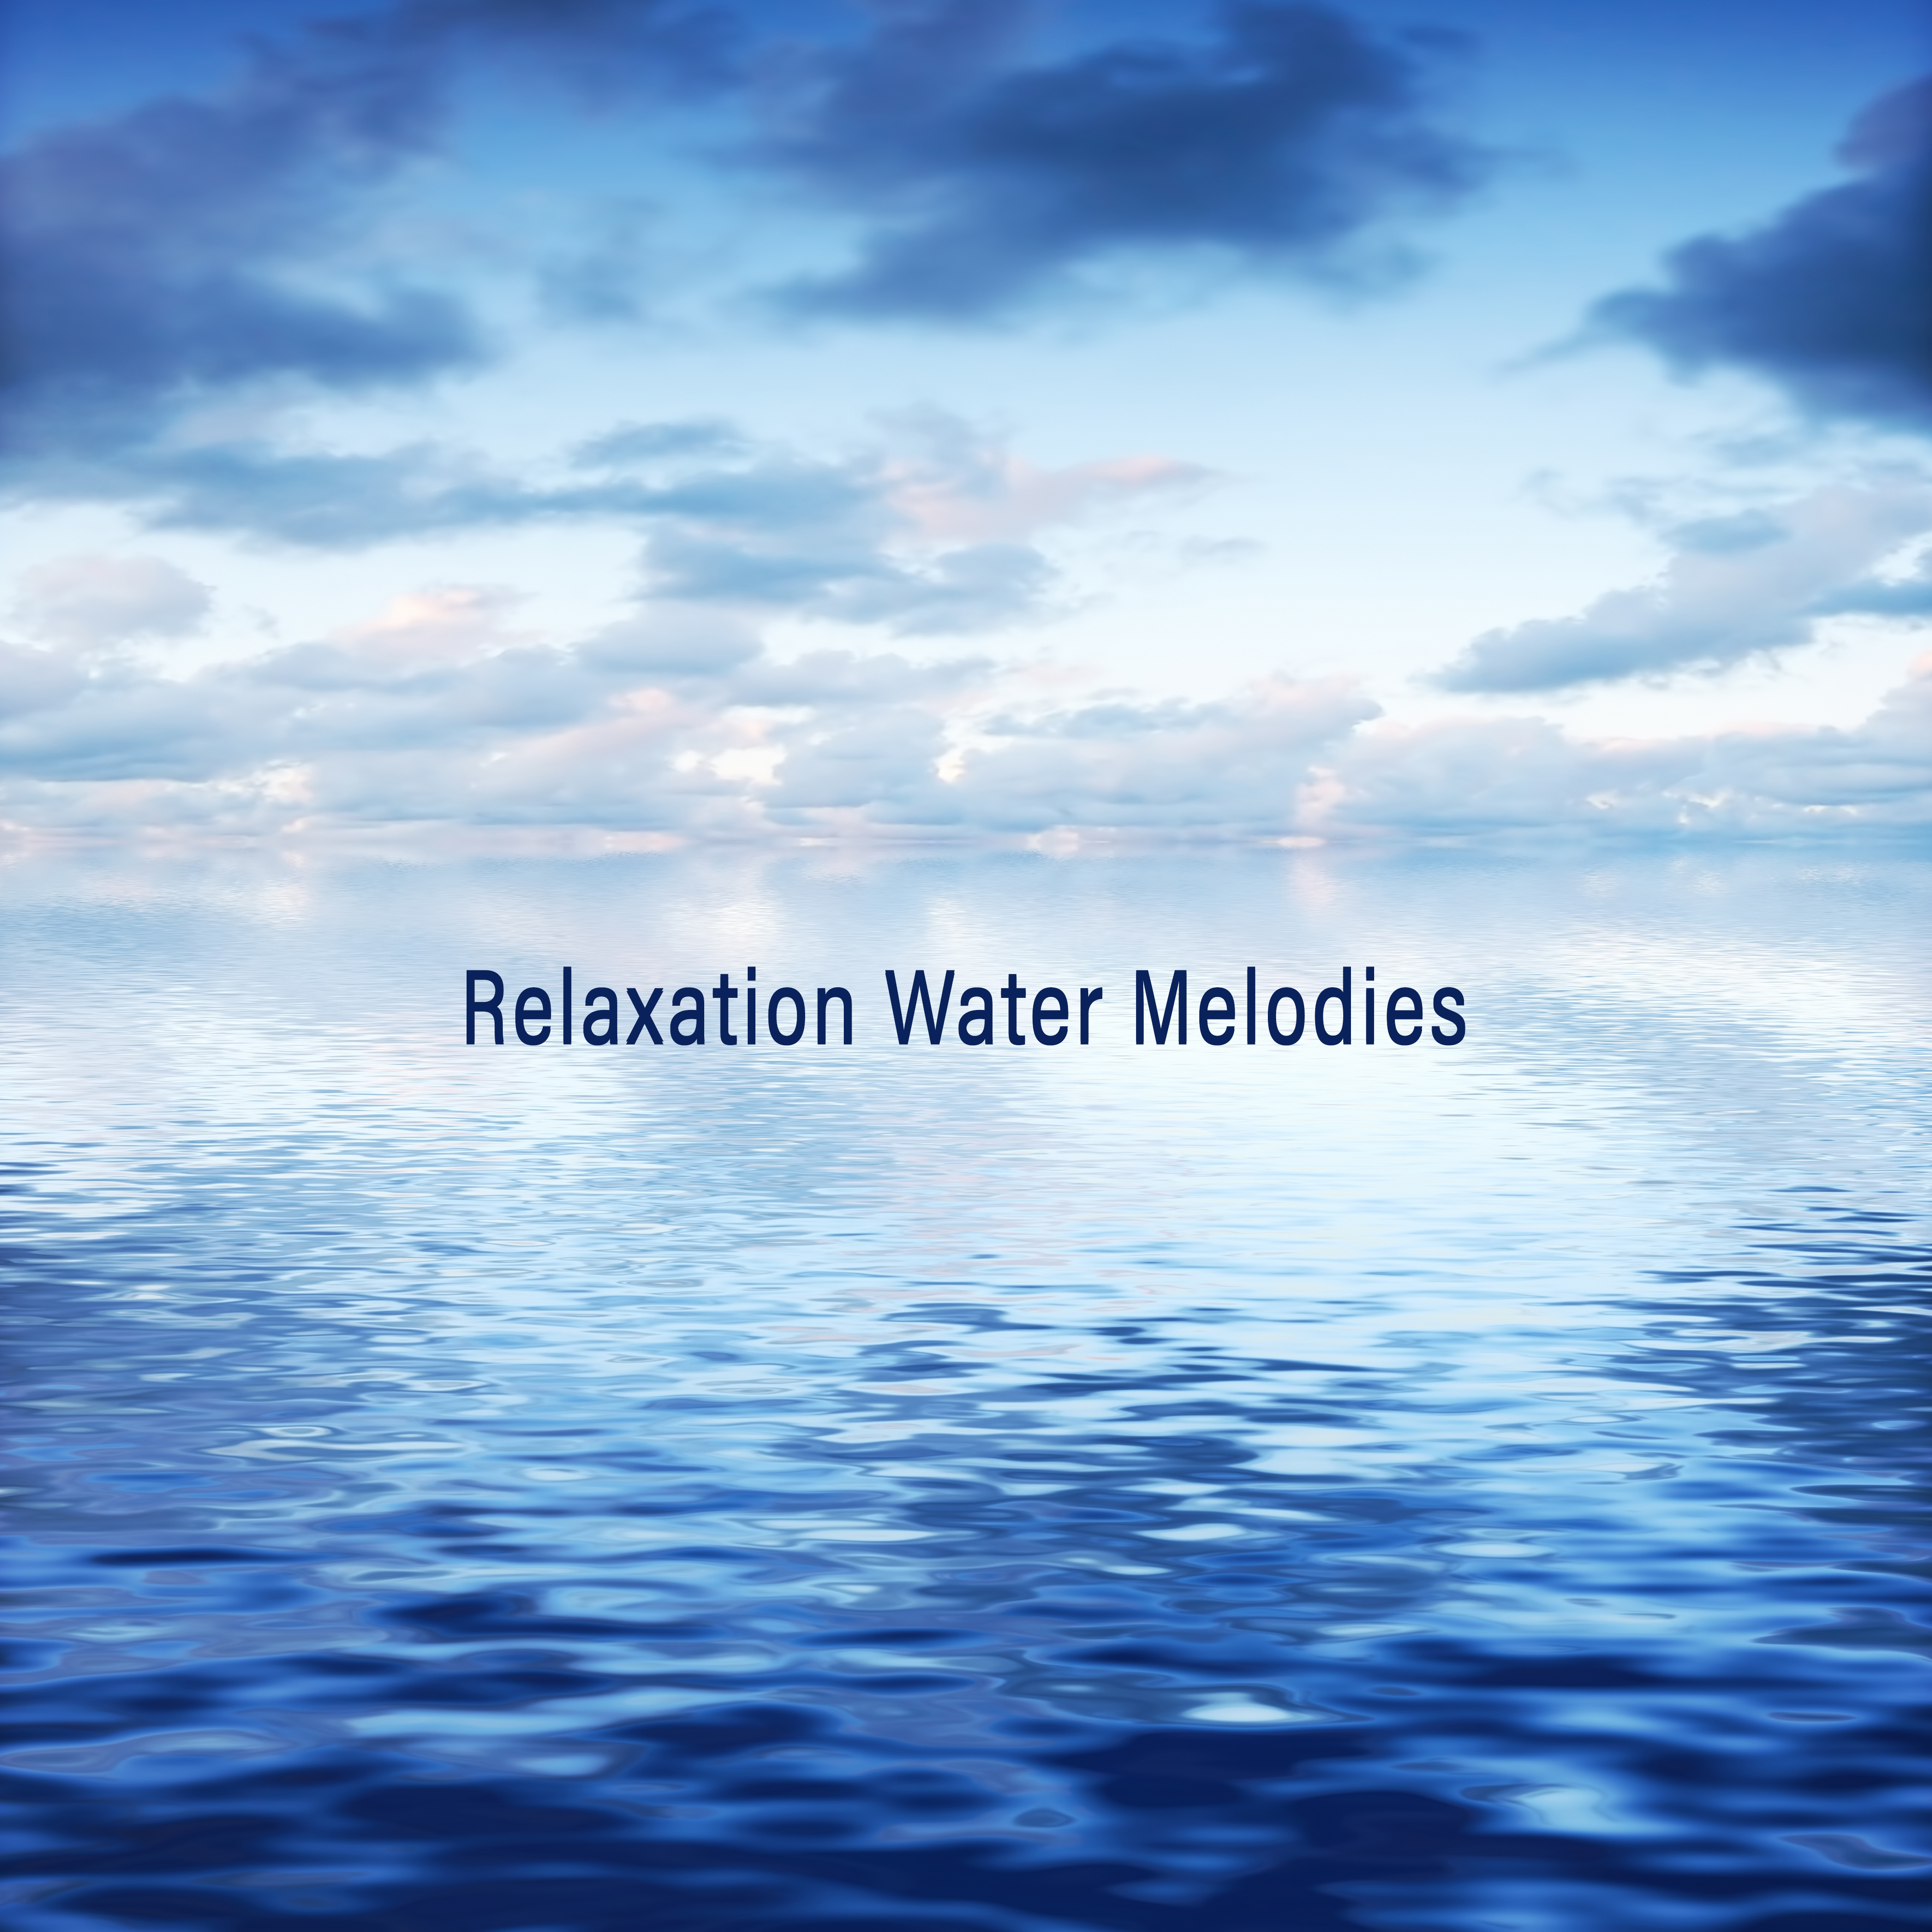 Relaxation Water Melodies